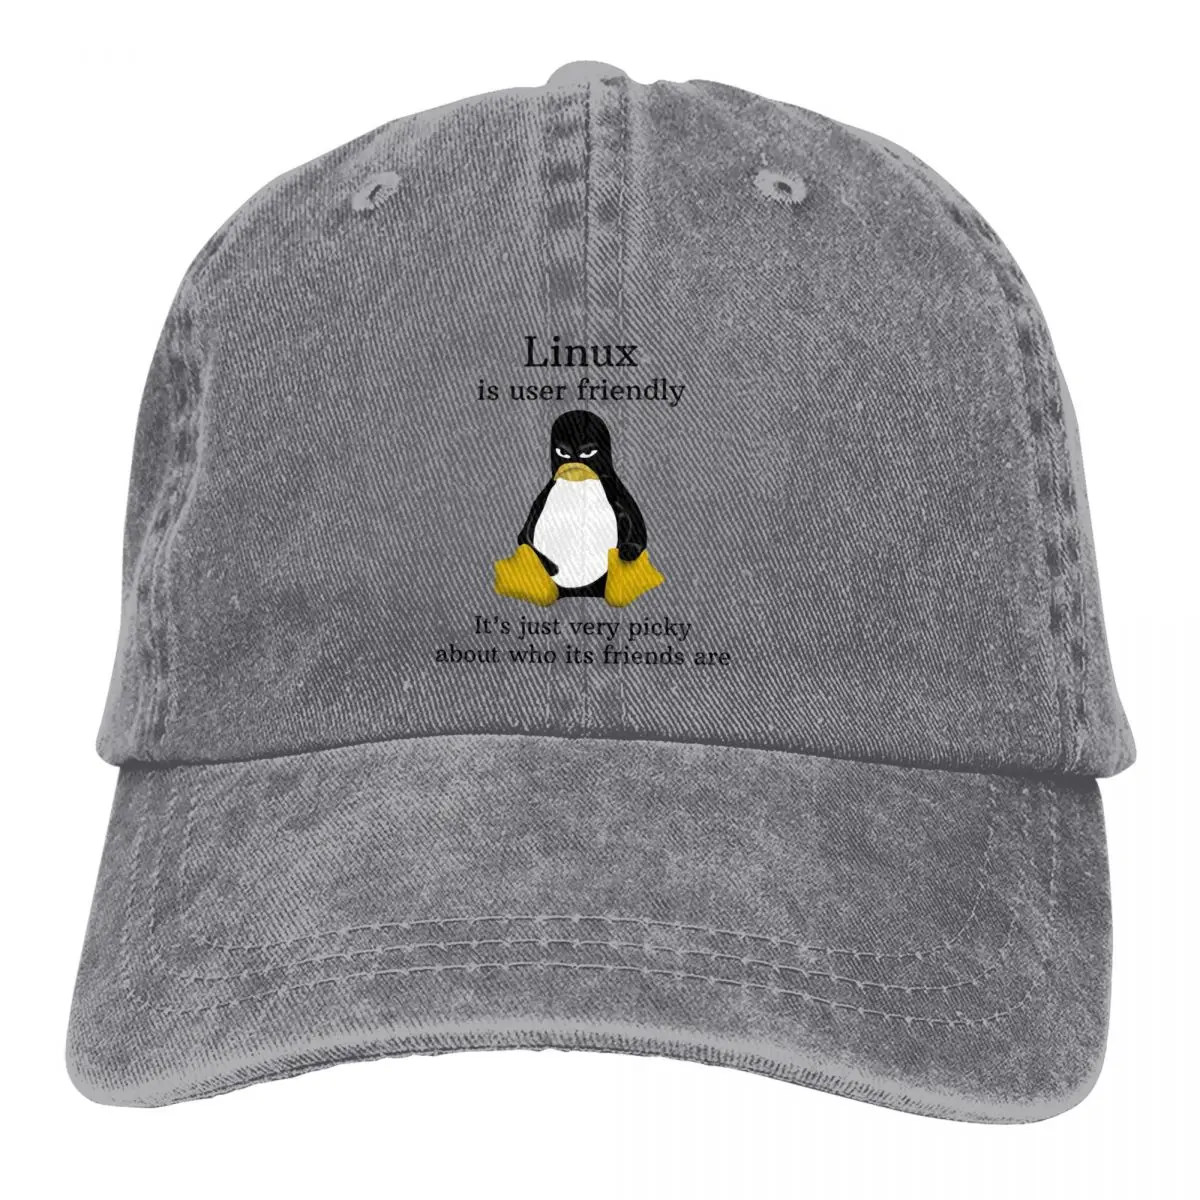 

Washed Men's Baseball Cap User Friendly Just Picky Trucker Snapback Caps Dad Hat Linux Operating System Tux Penguin Golf Hats